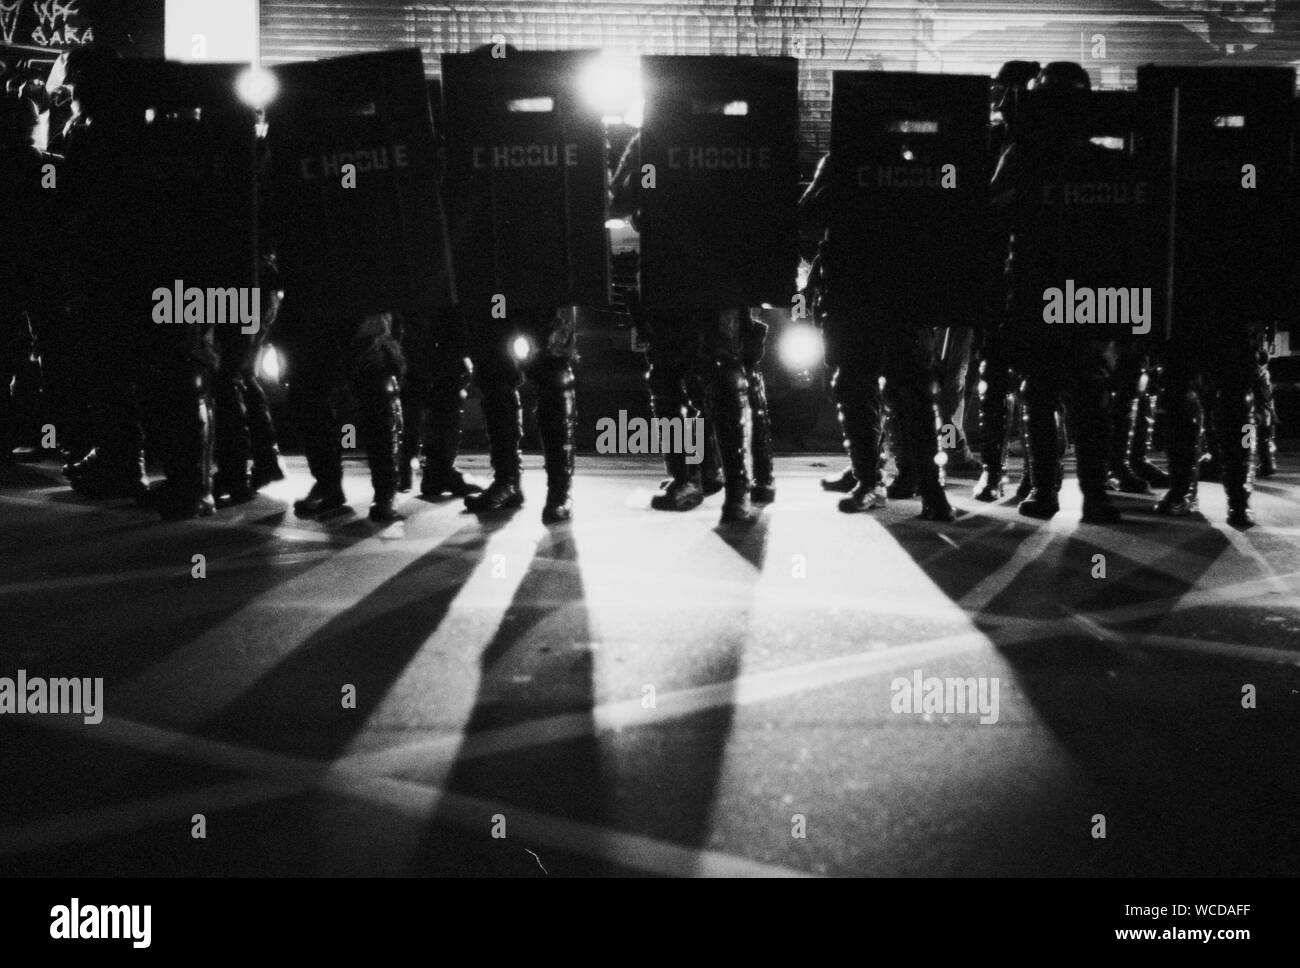 Police Force Standing With Riot Shield On Illuminated Street Stock Photo